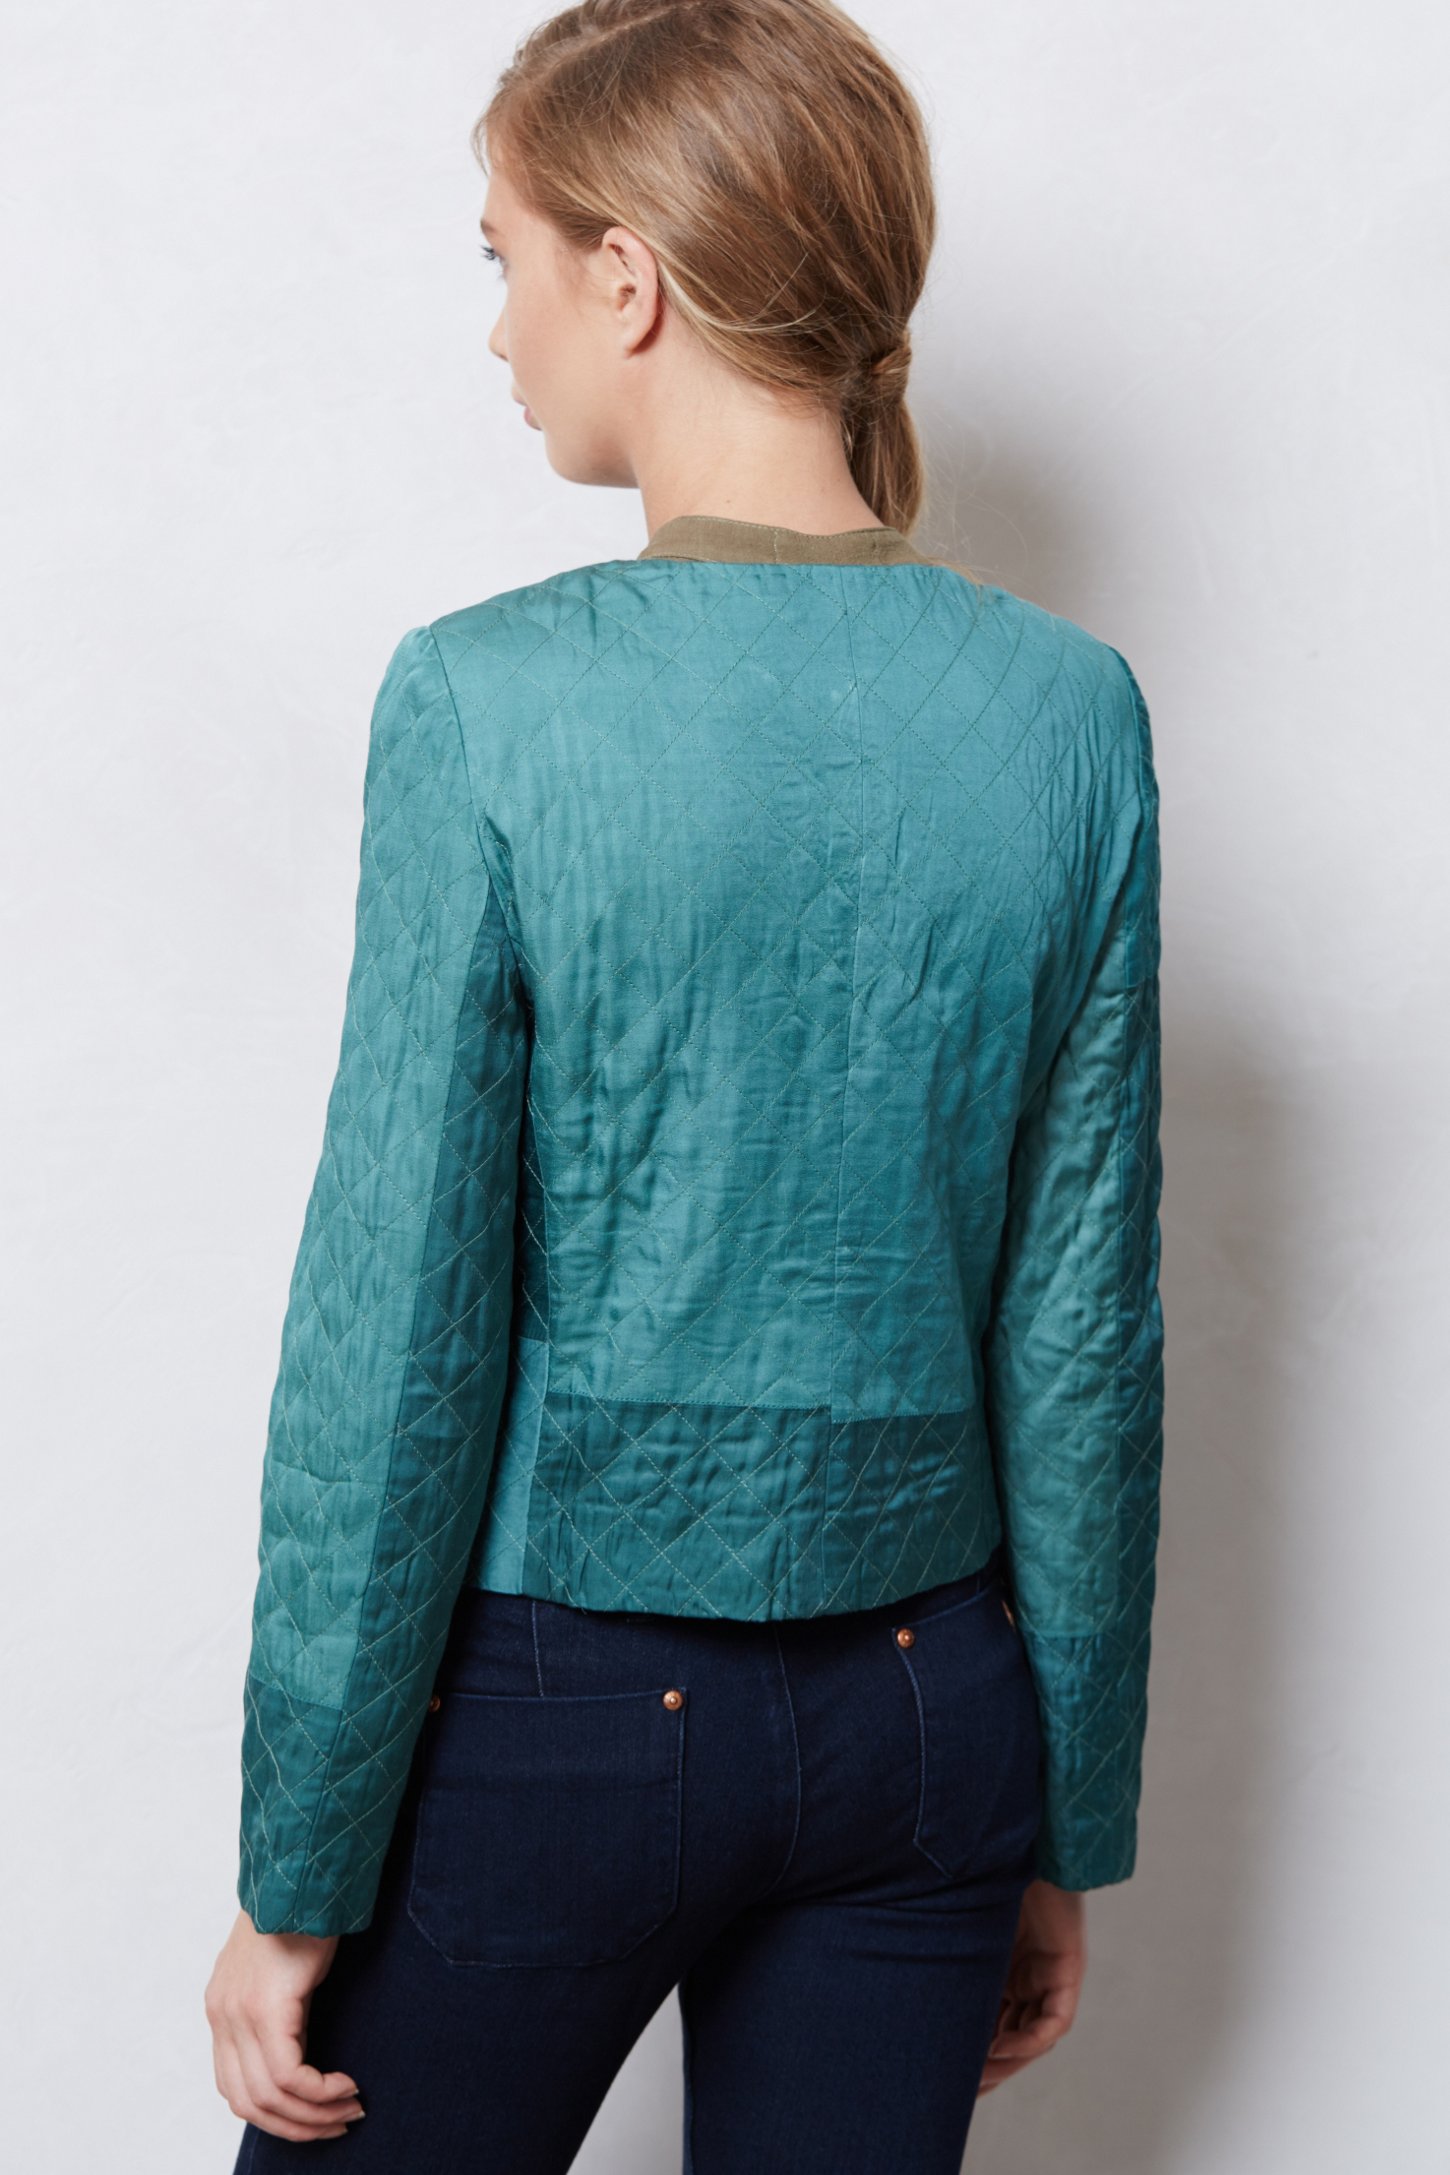 Lyst - Anthropologie Quilted Crochet Jacket in Blue